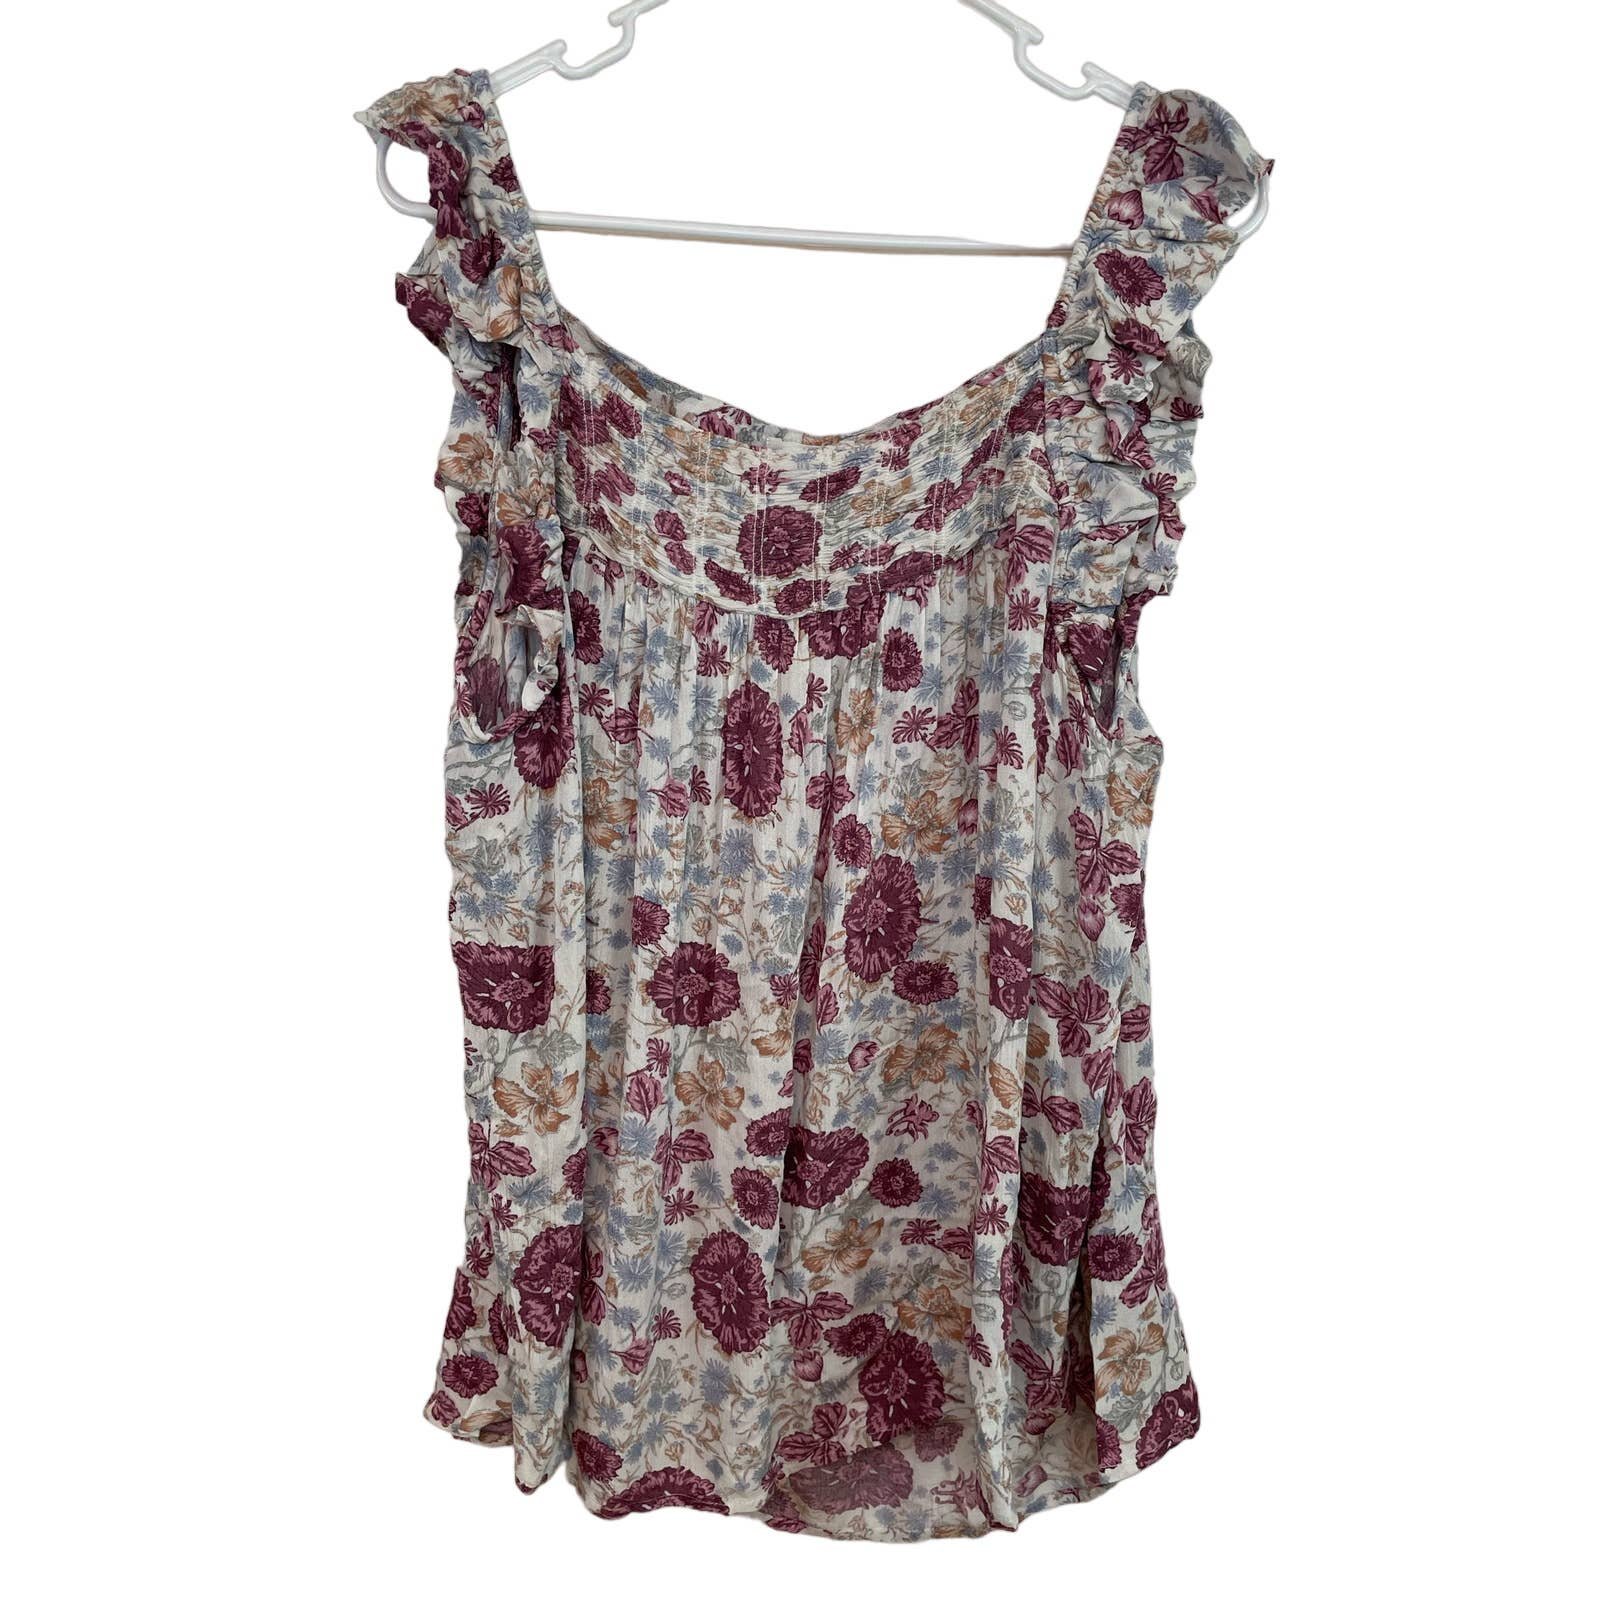 save up to 70% Maurices Floral Tank 2 Sleeveless Ruffle